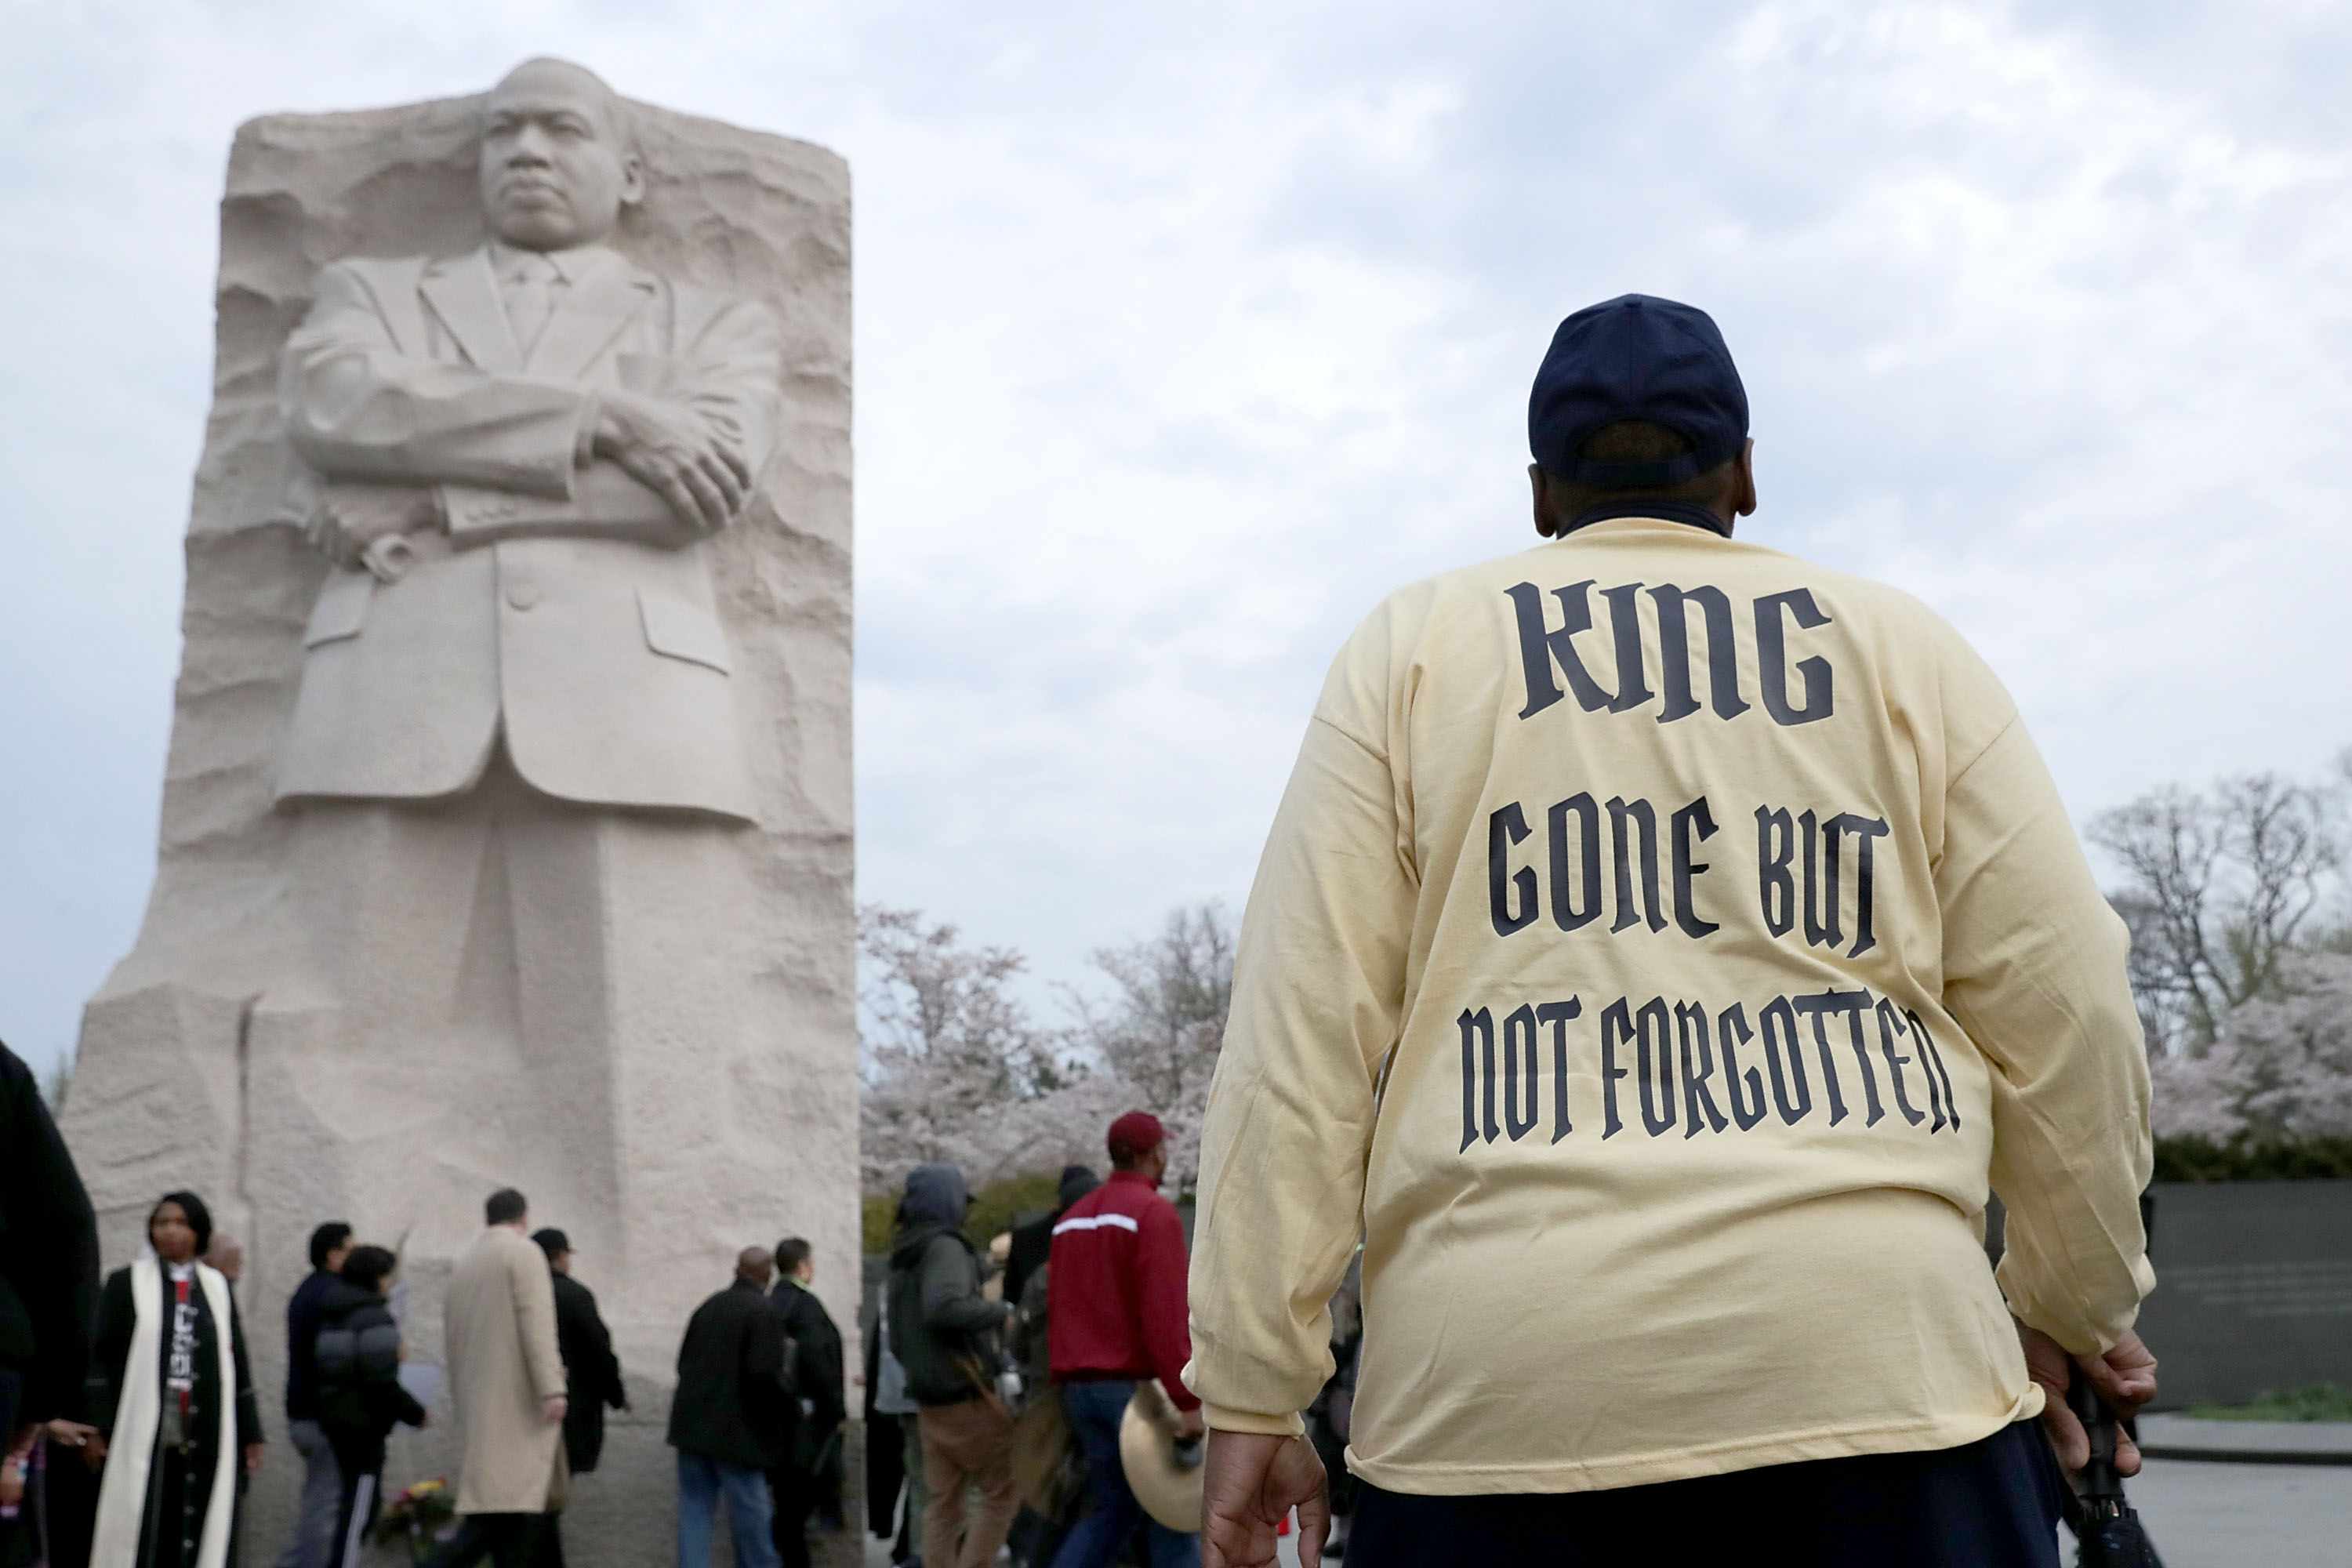 Marchers gather at the Dr. Martin Luther King Jr. Memorial for a silent walk to a prayer service on the National Mall to mark the 50th anniversary of King